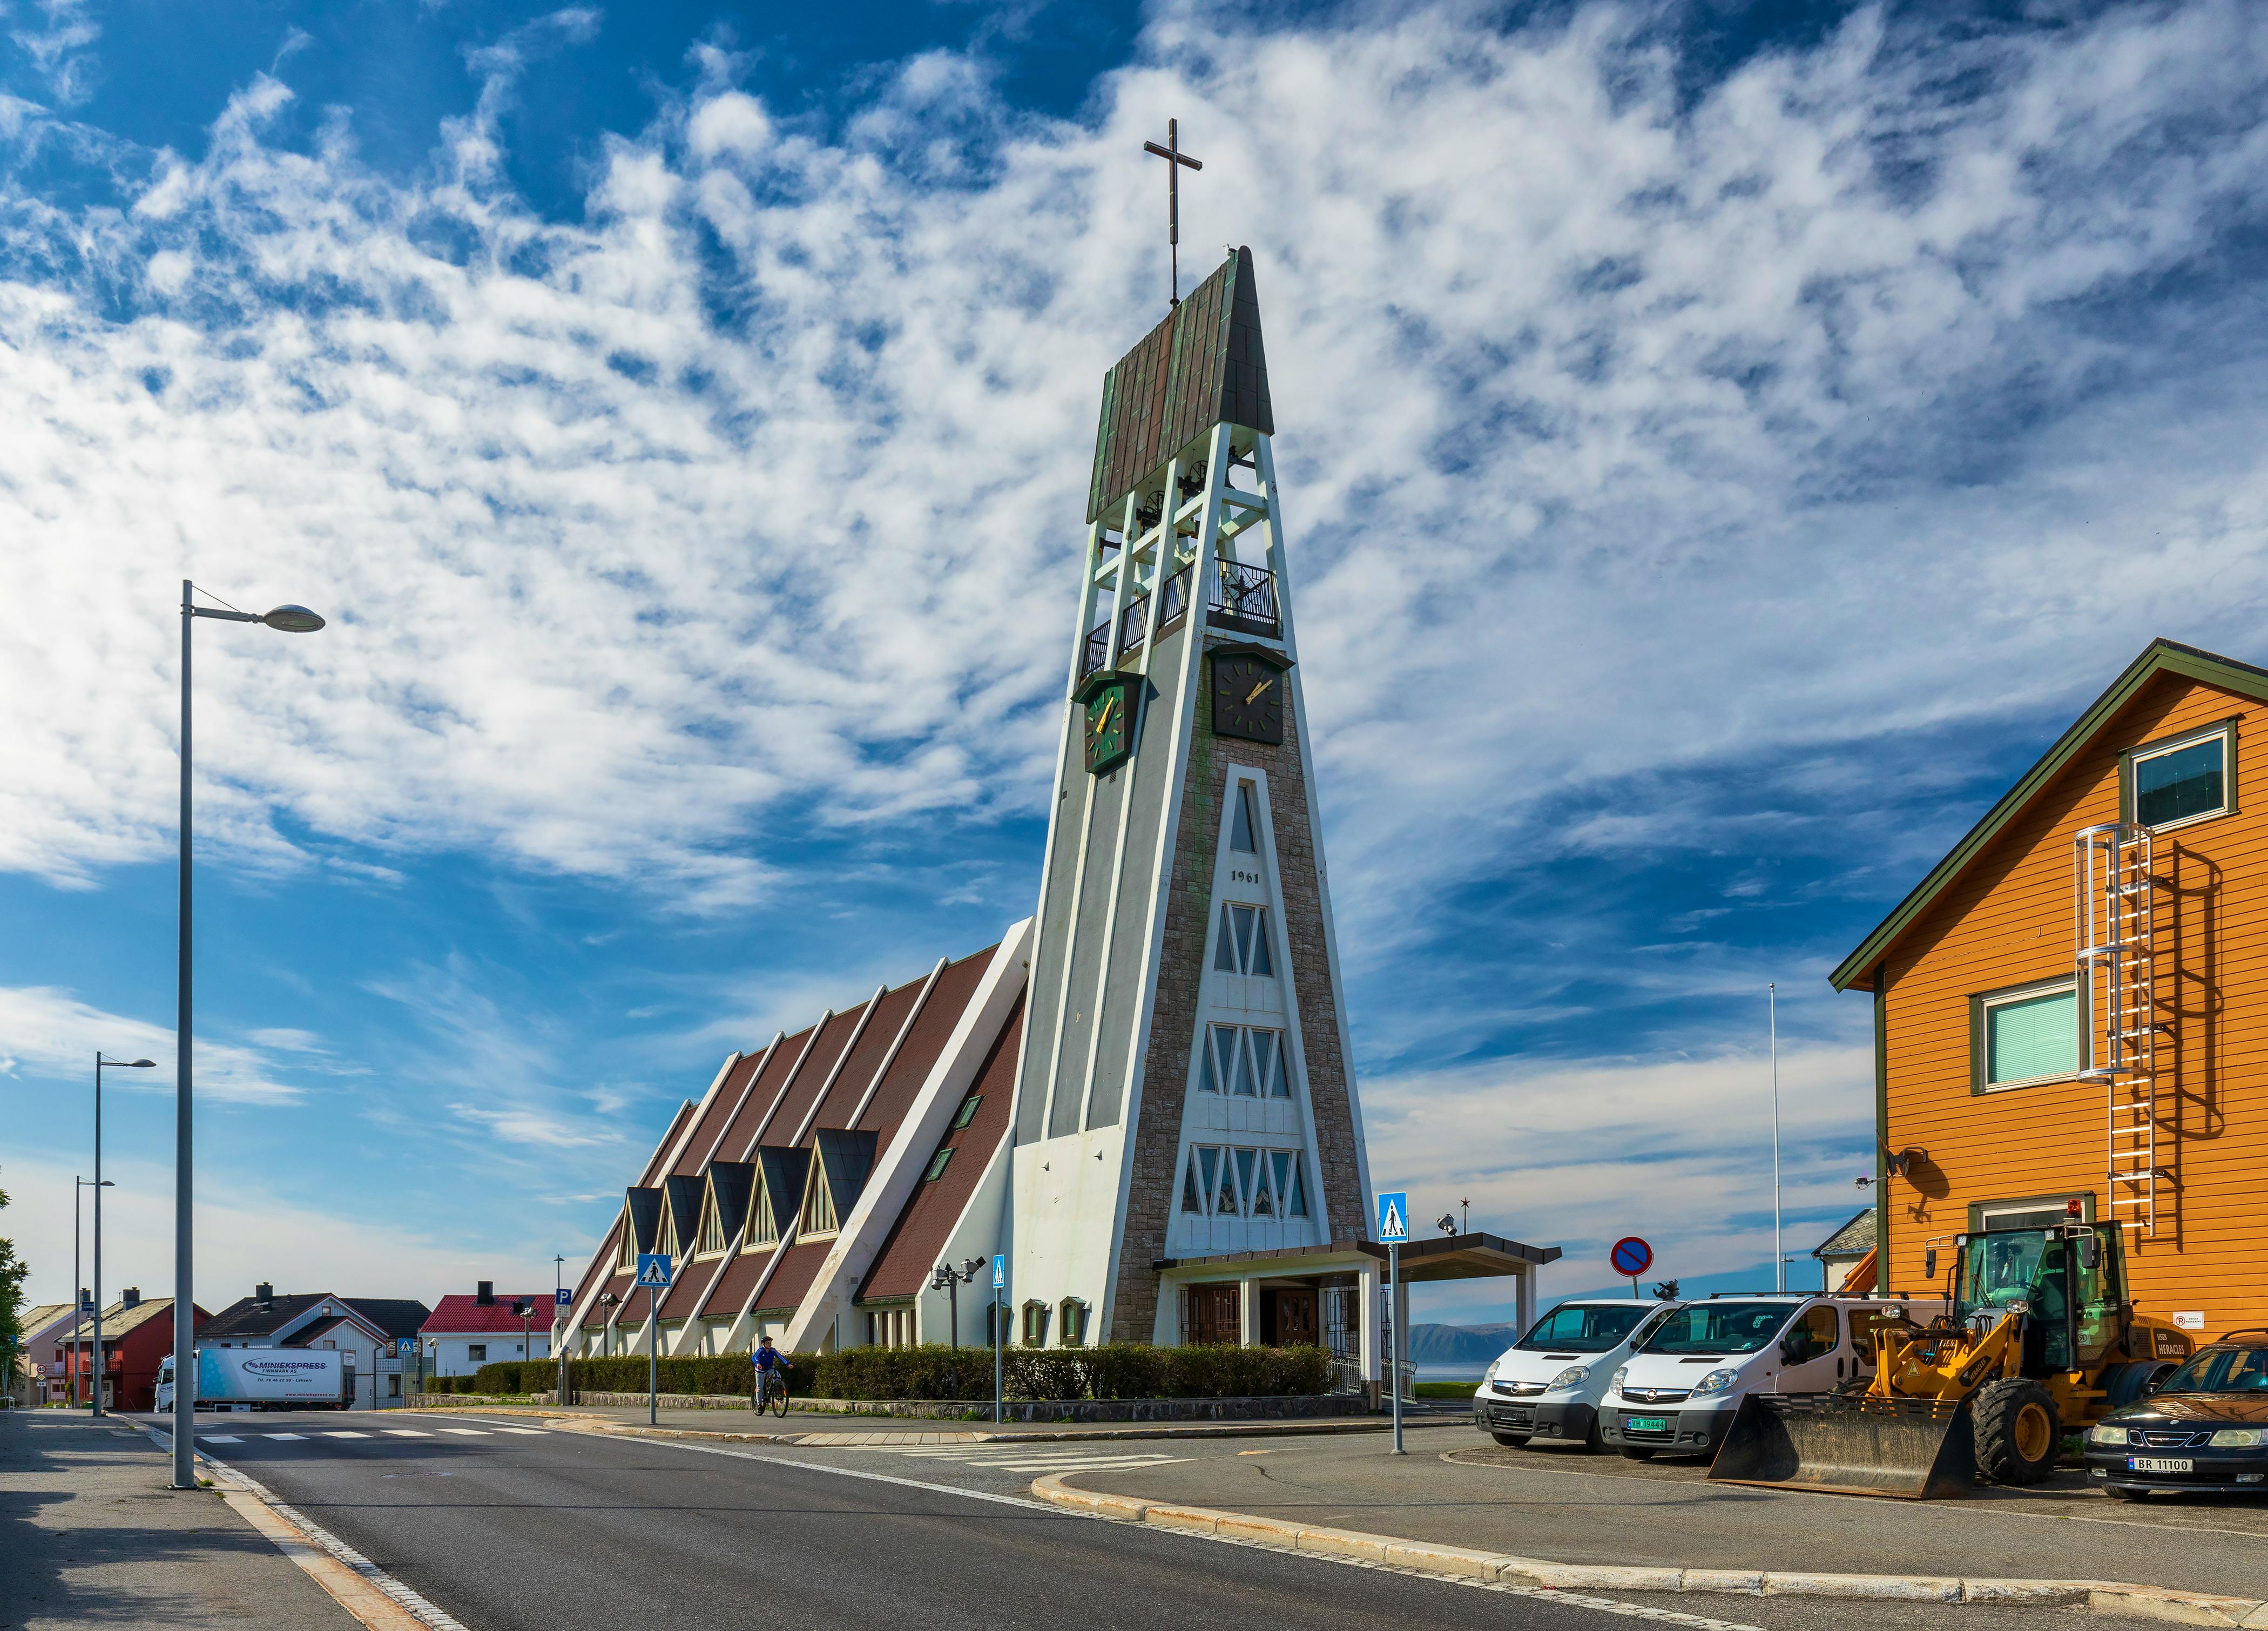 Cathedral in Hammerfest, Norway